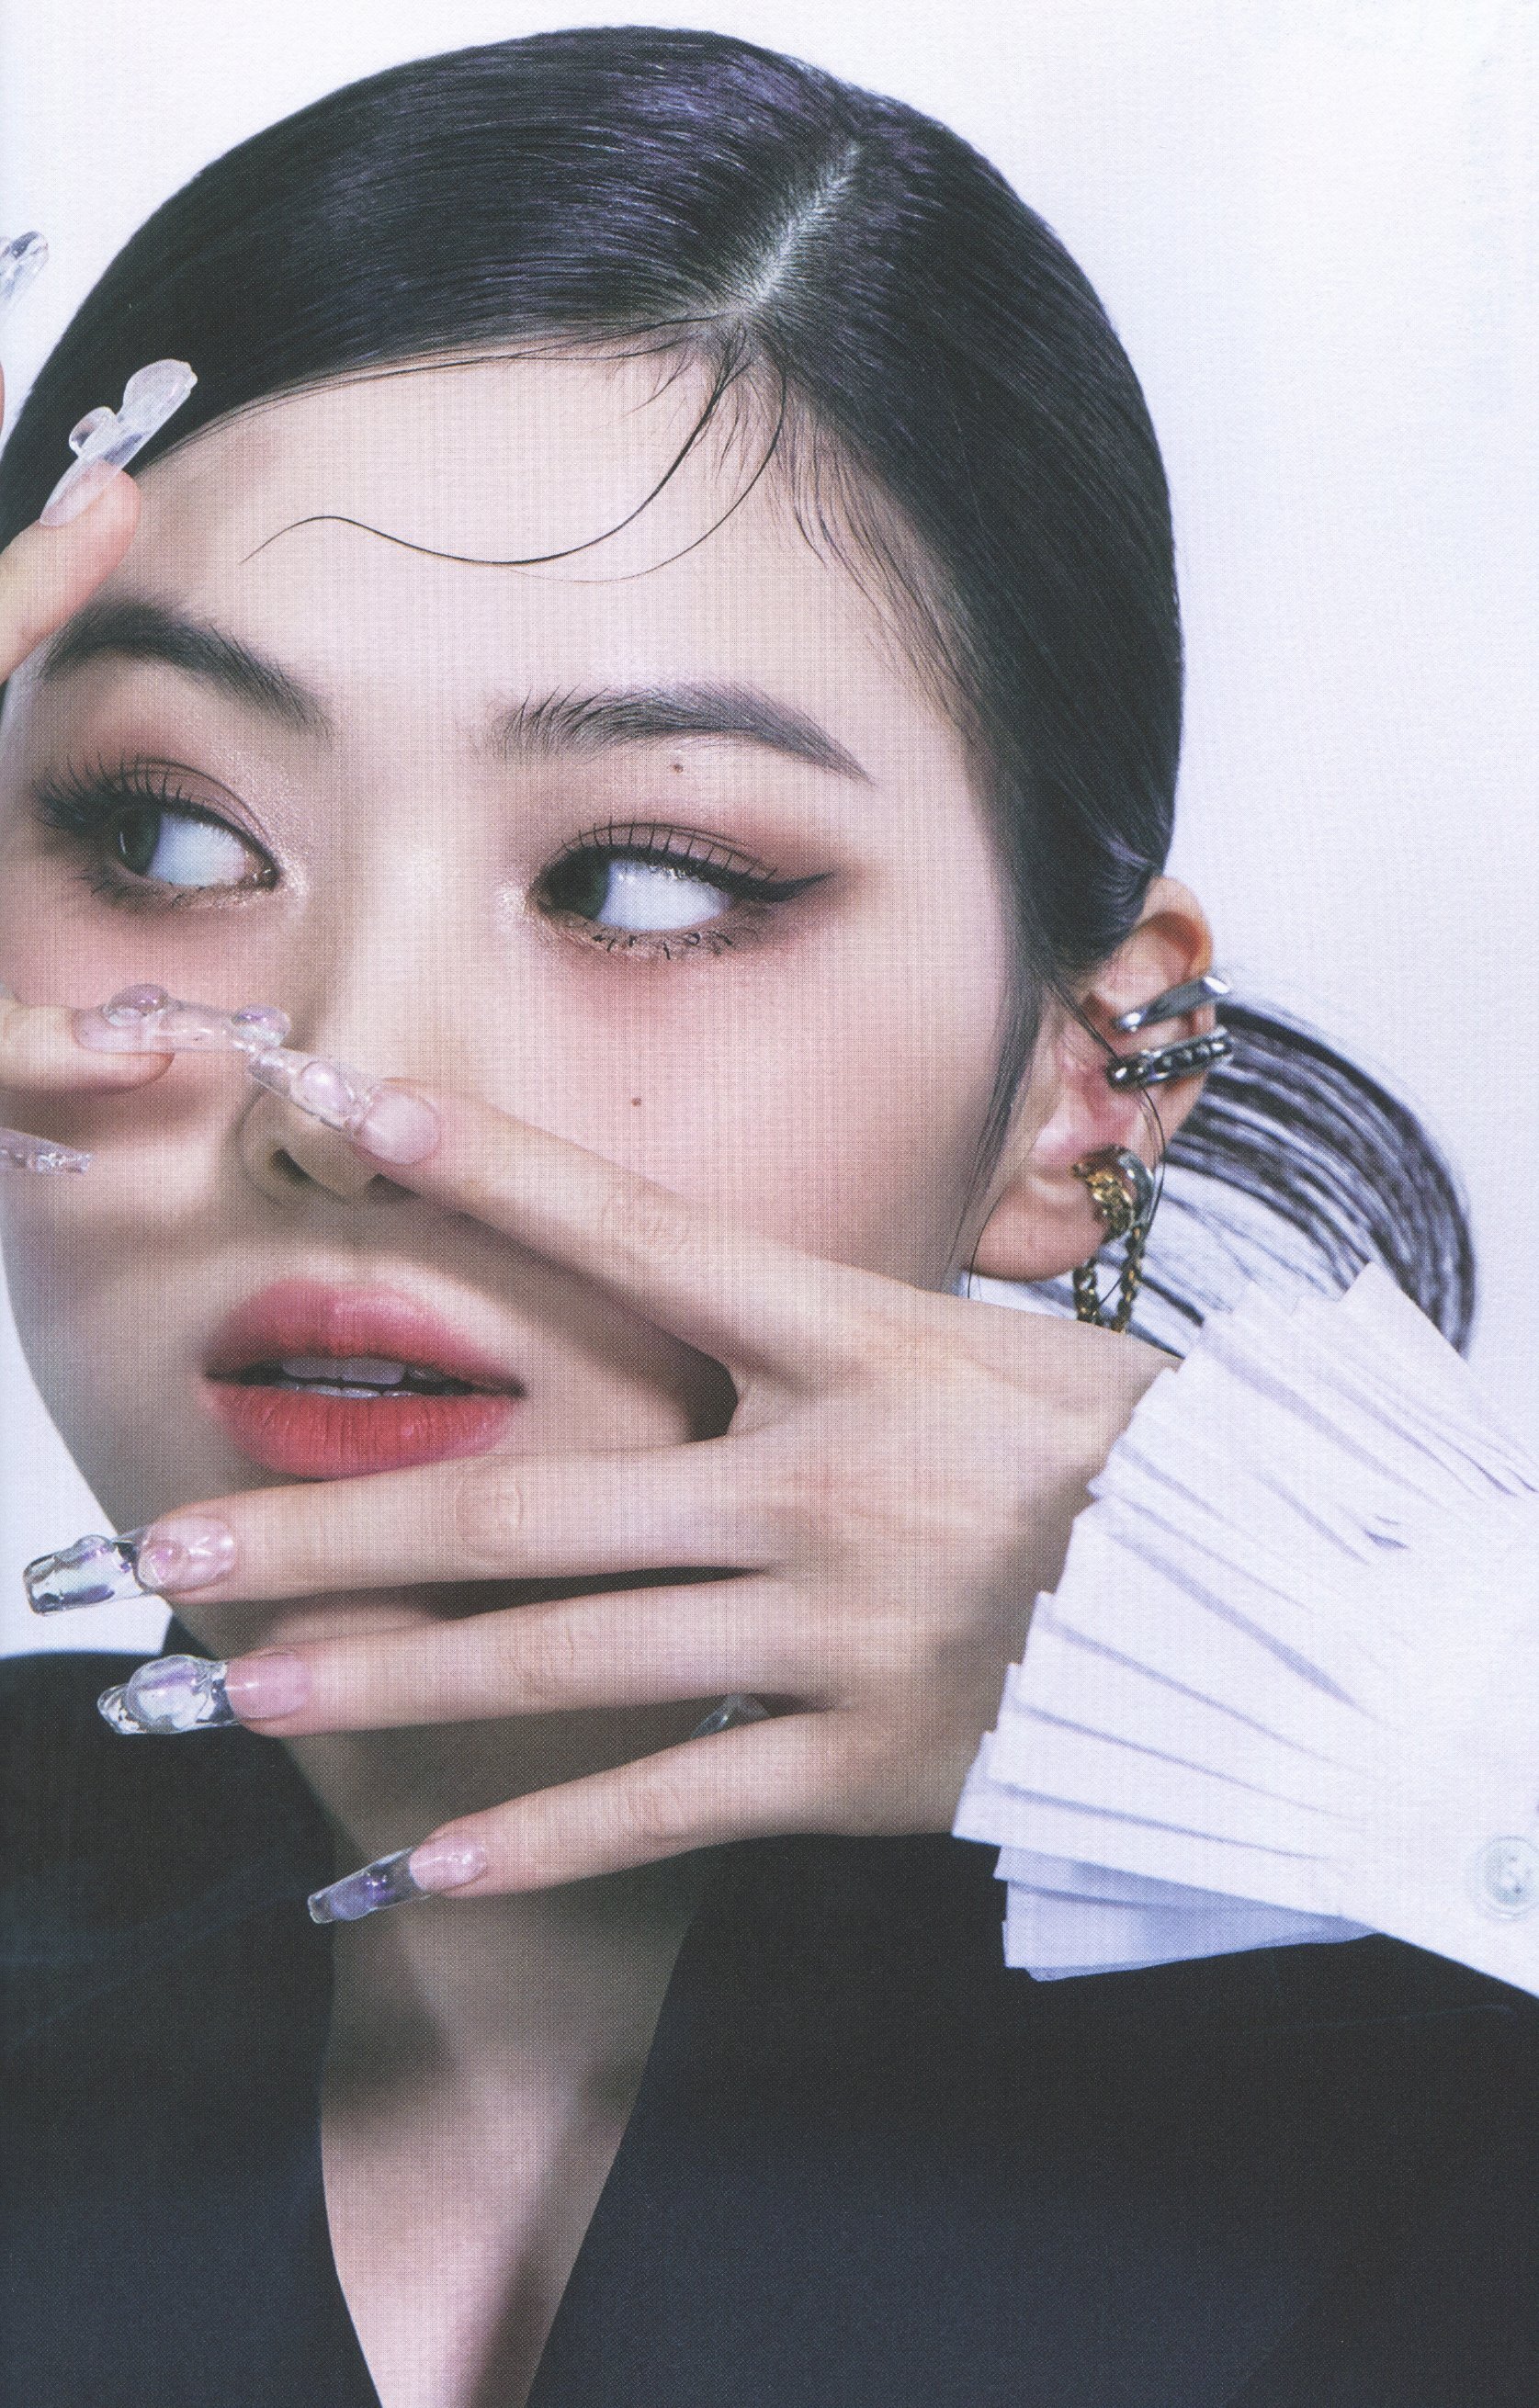 ITZY Checkmate Teaser Photos 1 (HD/HQ) - K-Pop Database /